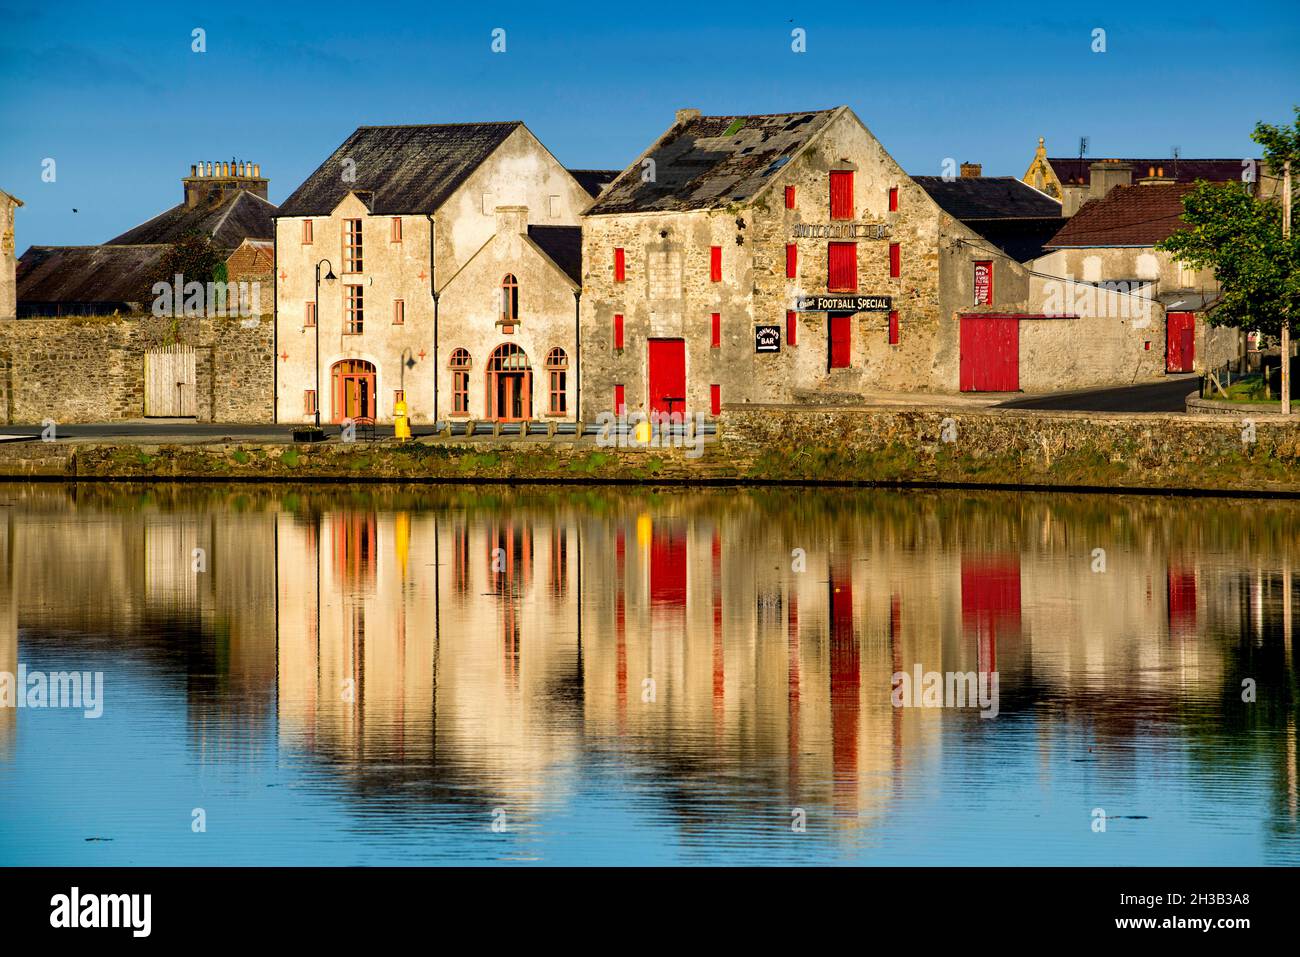 Old warehouses at Rathmelton on the river Lennon, County Donegal, Ireland Stock Photo